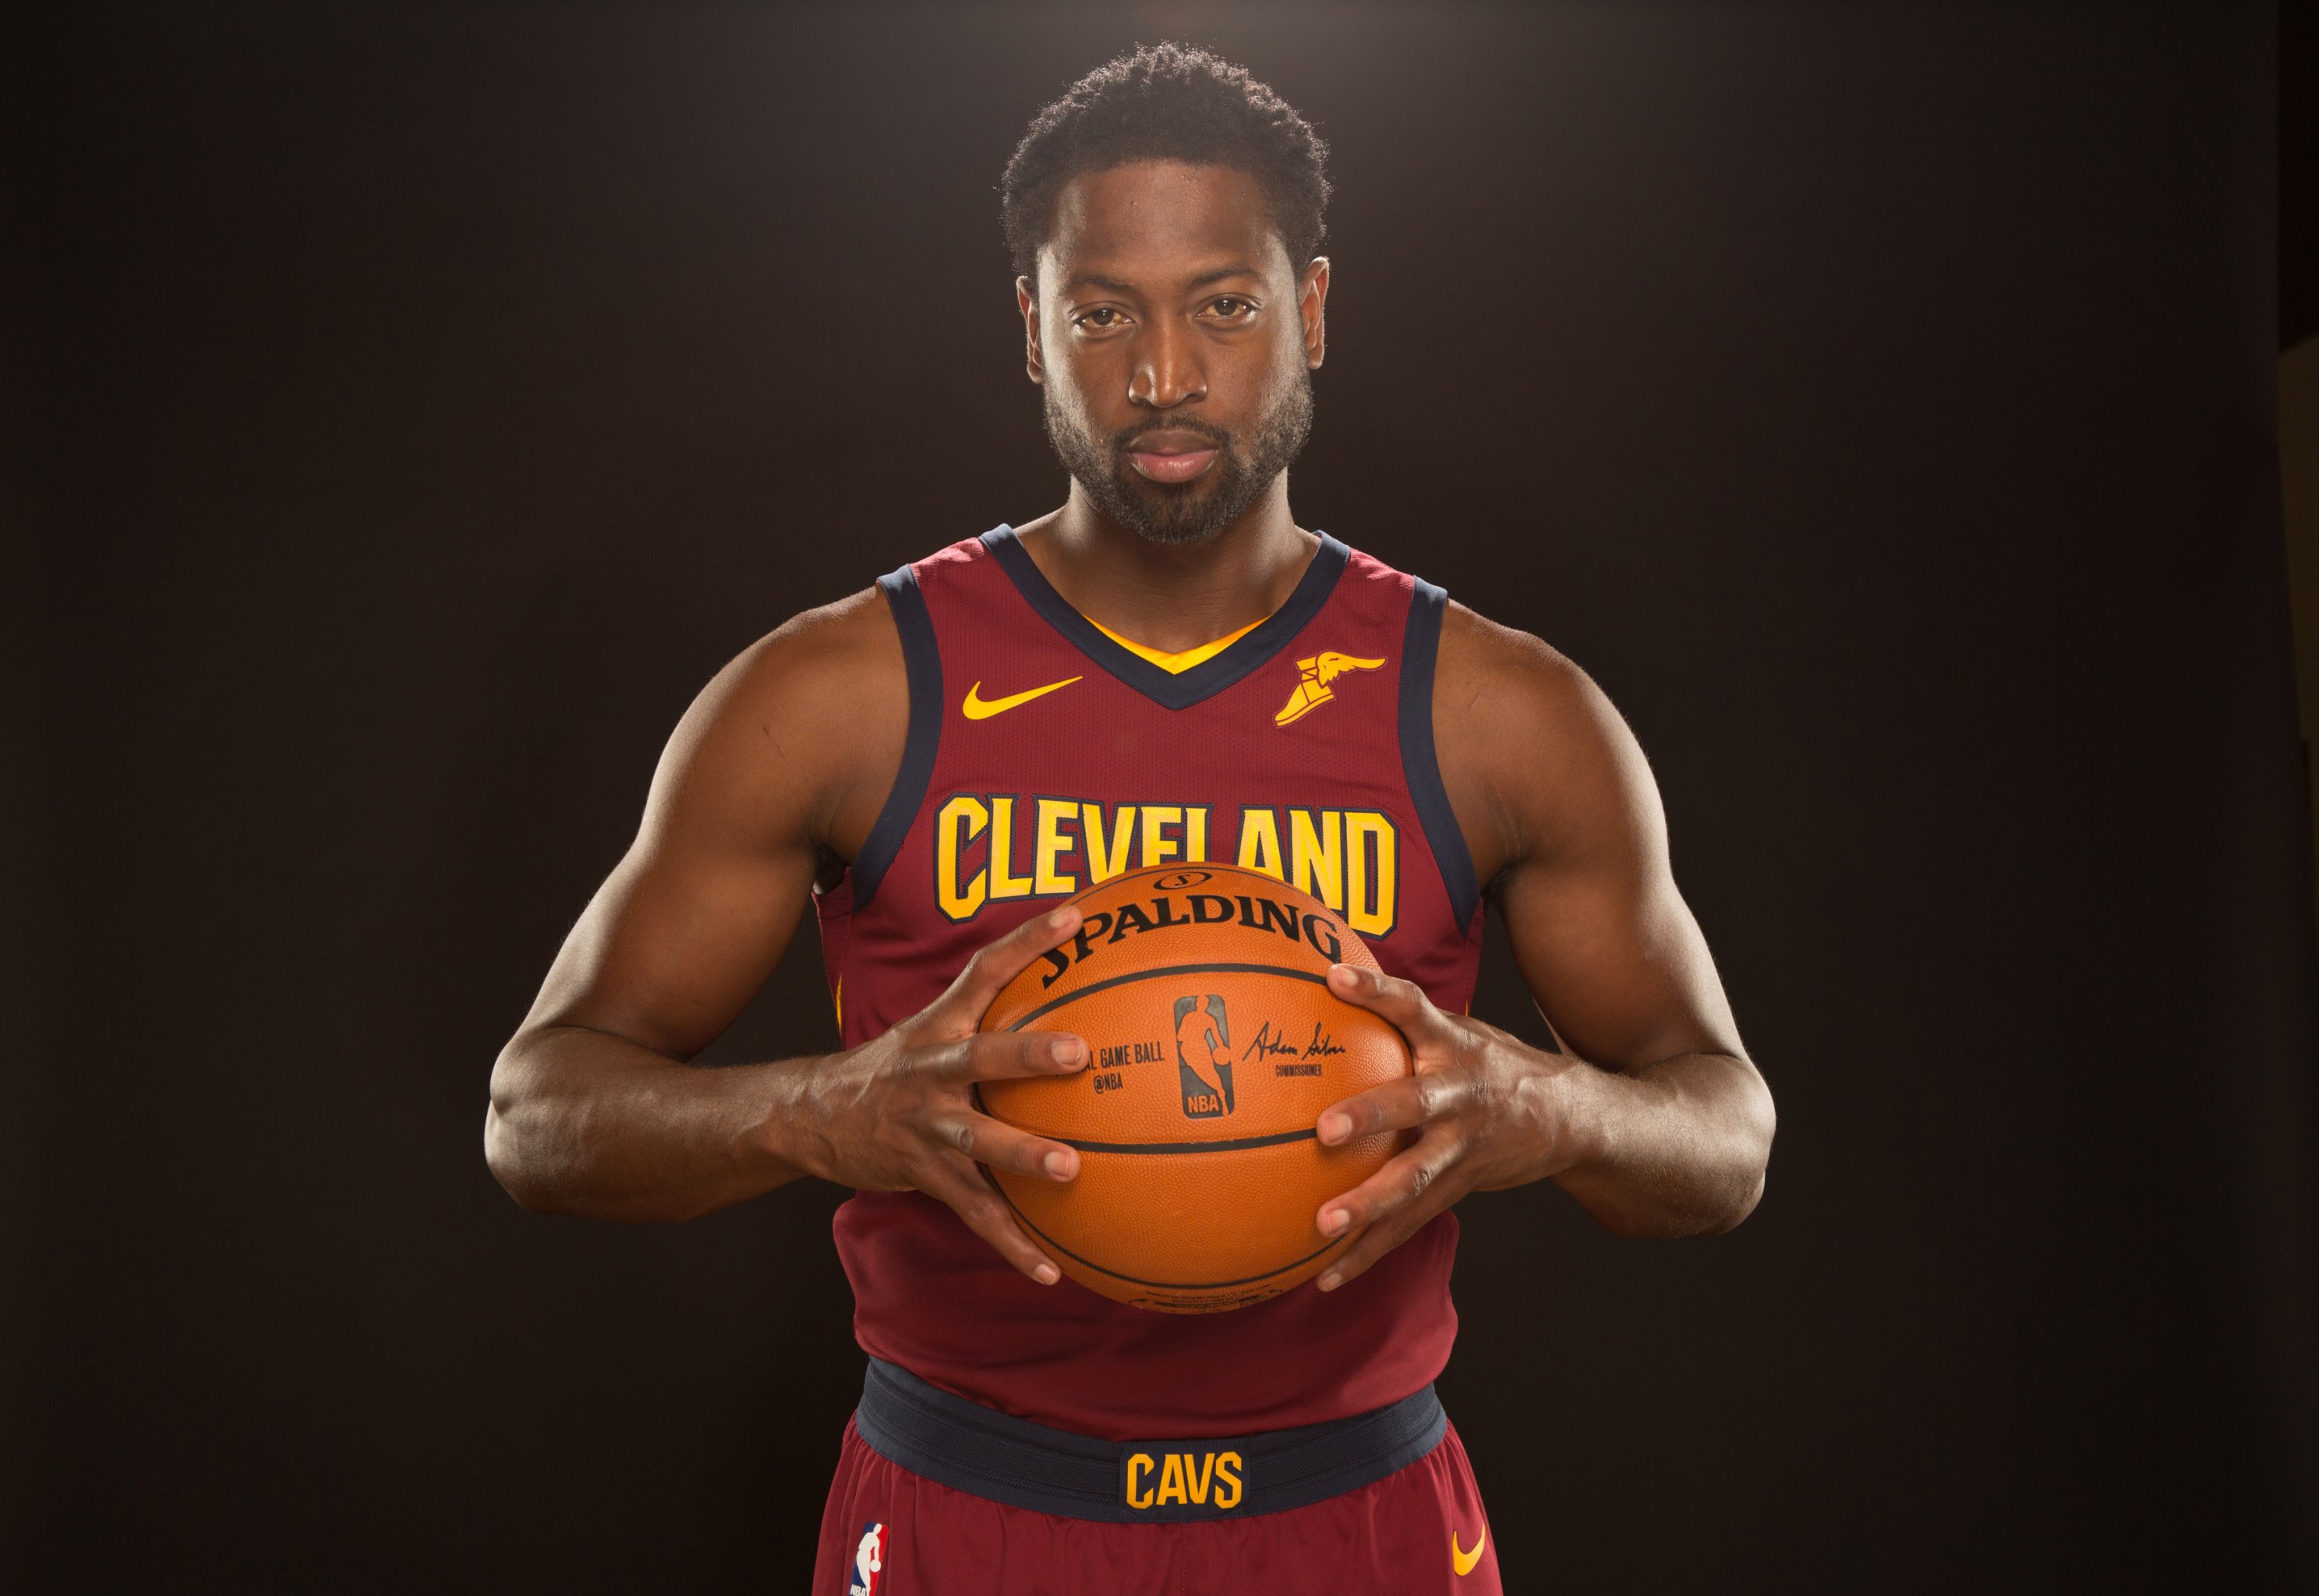 CLEVELAND CAVALIERS 2017/18 ROSTER (FULL) 